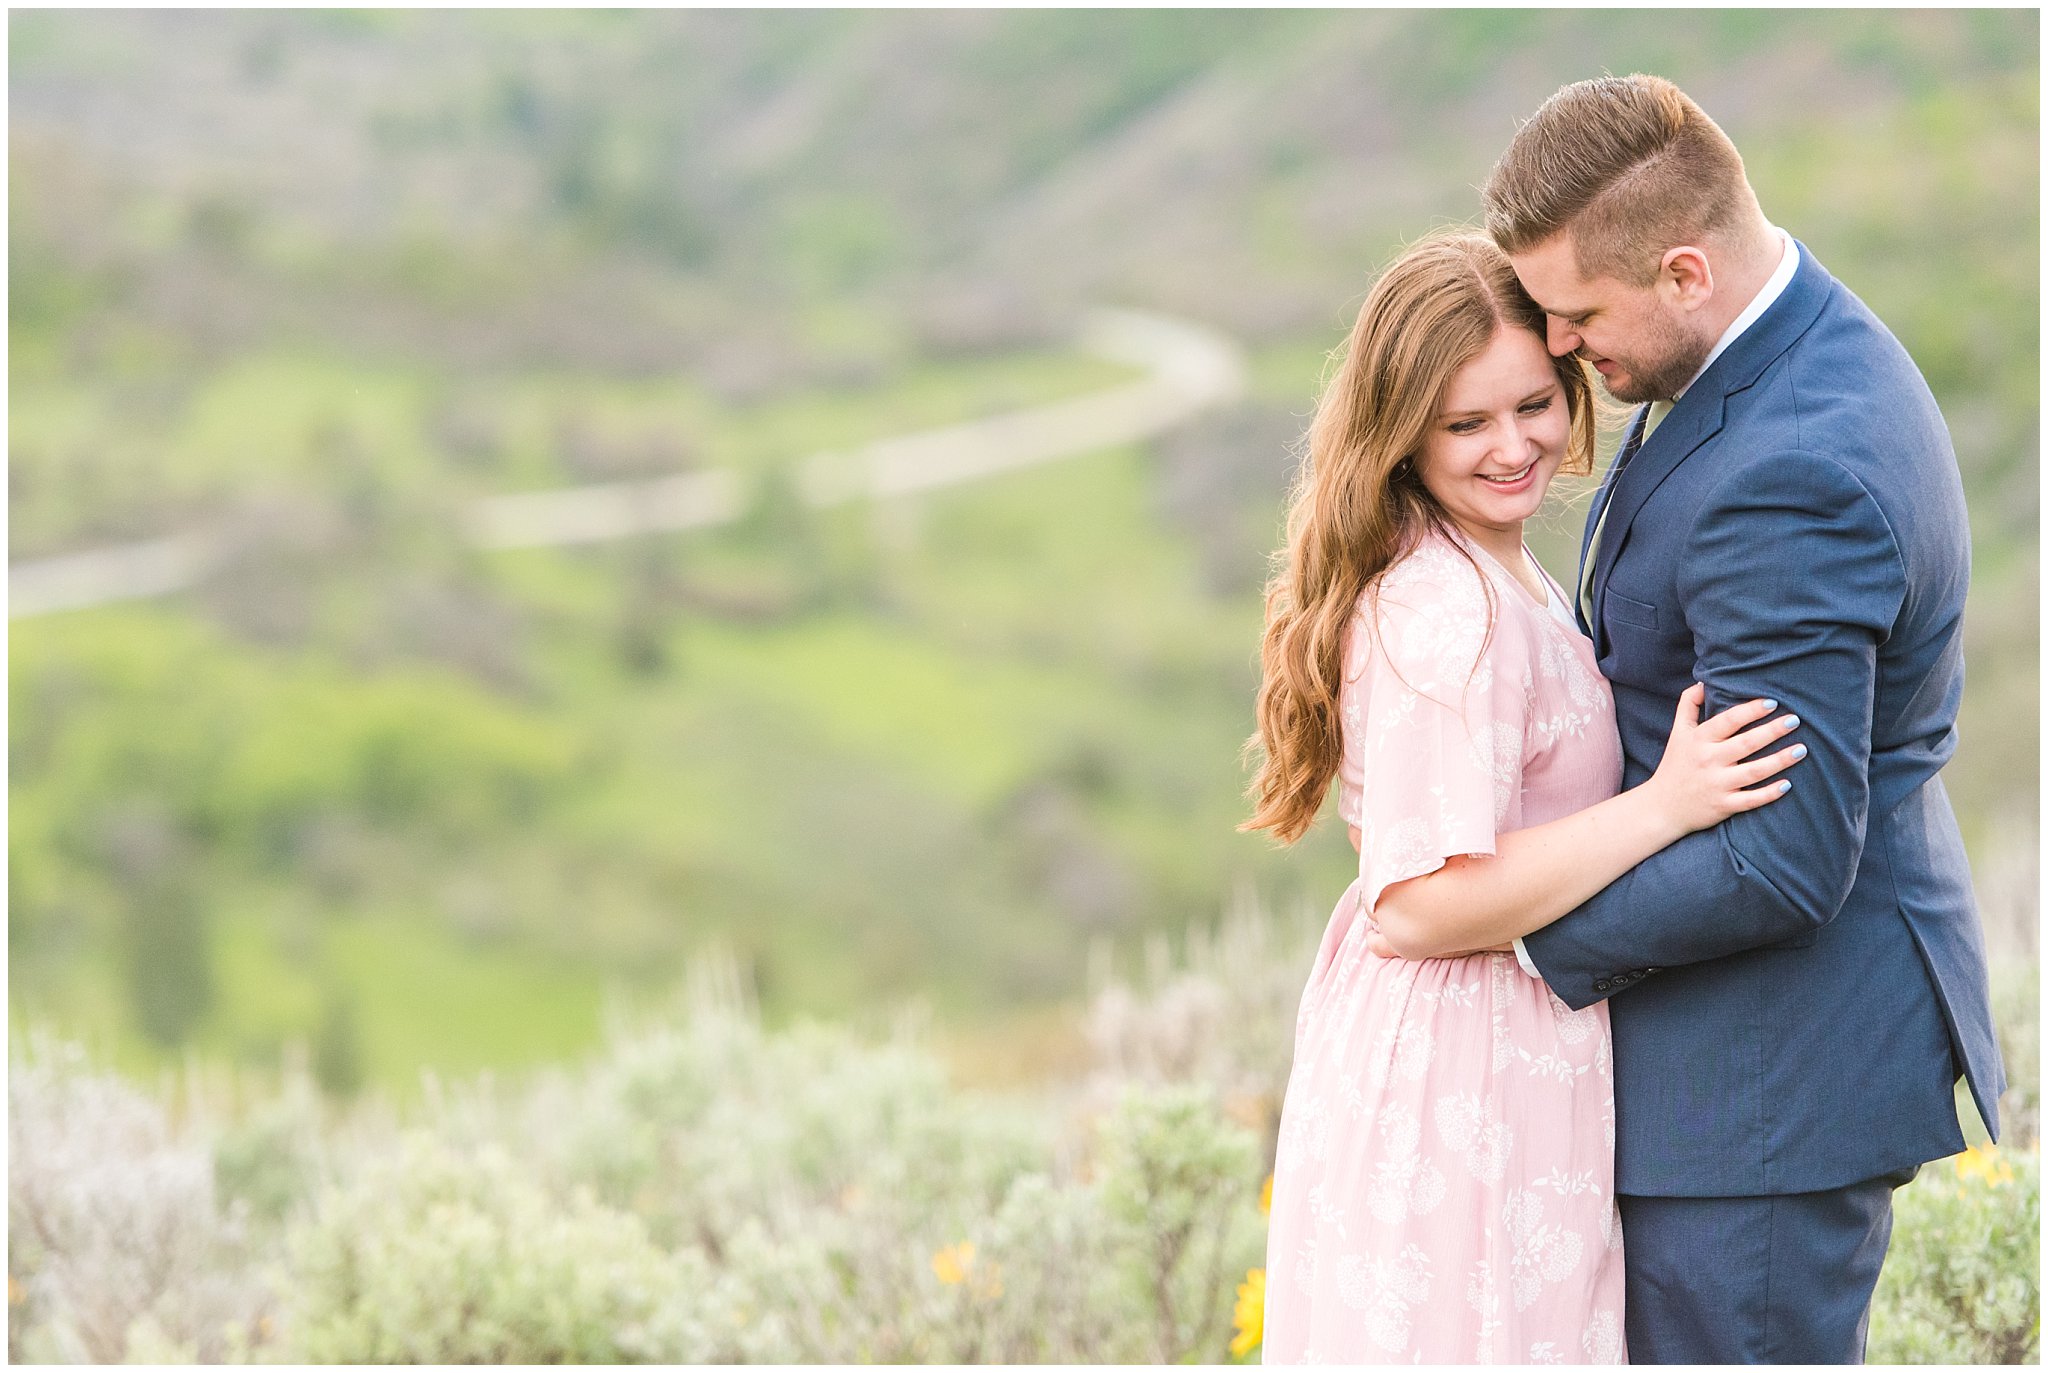 Couple dressed in blush dress and blue suit surrounded by sunflowers and snowy mountains | Ogden Valley Spring Mountain Engagement | Jessie and Dallin Photography